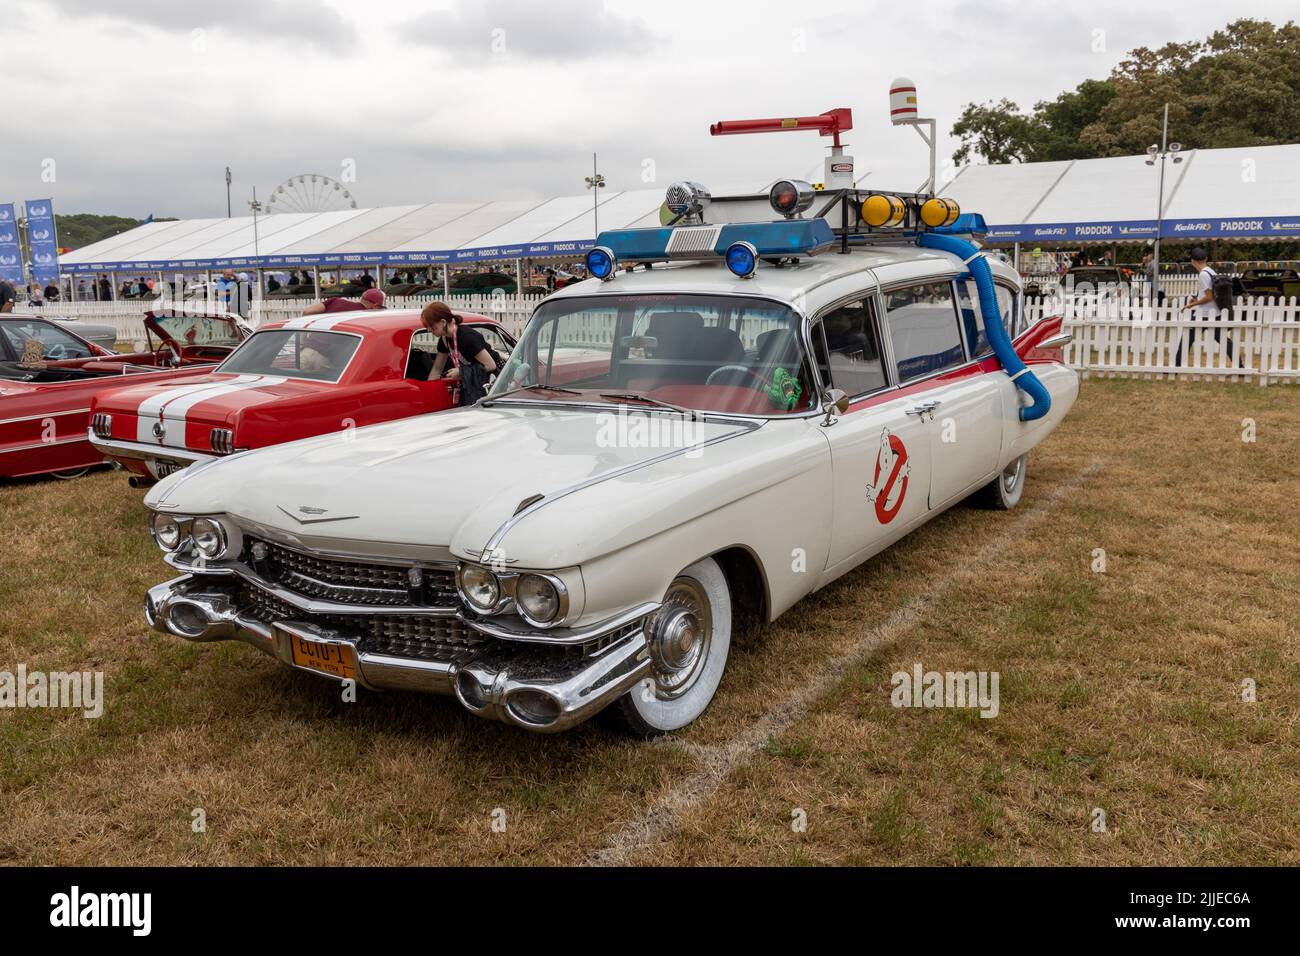 Ghostbusters Ecto1 – Cadillac Miller-Meteor Banque D'Images